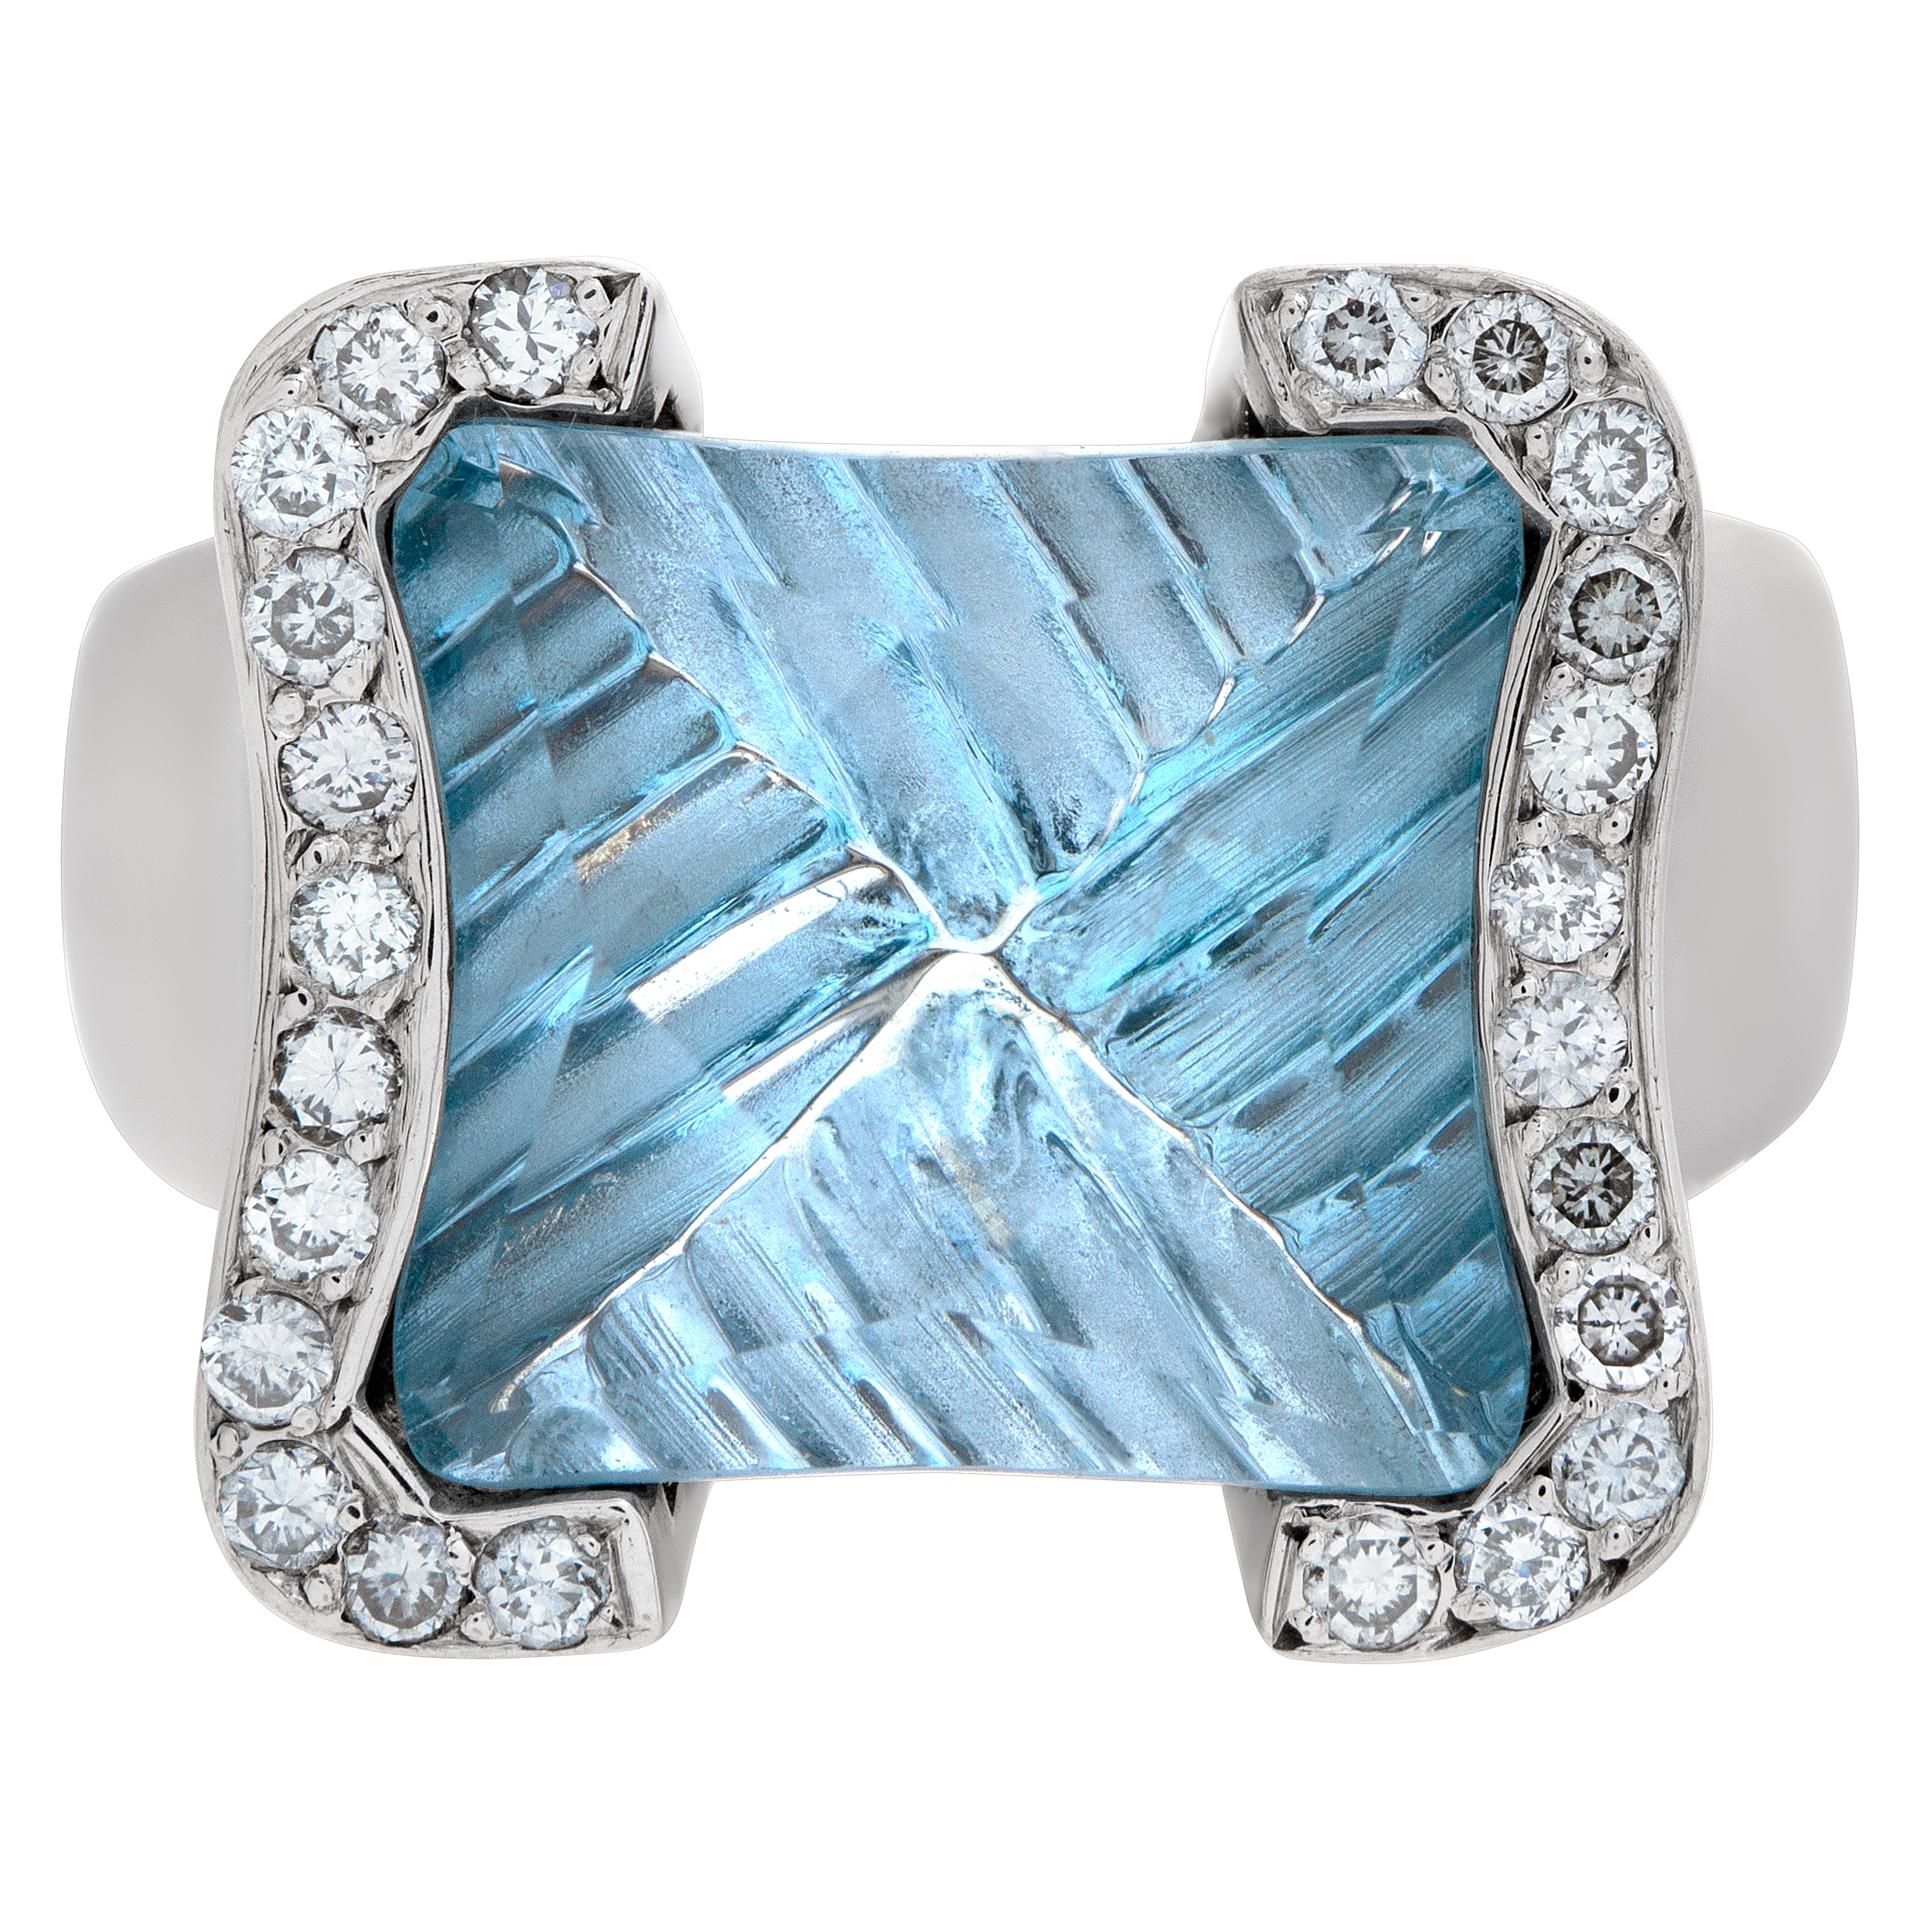 Feather cut blue topaz and diamond ring in 18k white gold with approximately 0.24 carats in diamonds. Size 6.25.

This Topaz ring is currently size 6.25 and some items can be sized up or down, please ask! It weighs 7.7 pennyweights and is 18k.